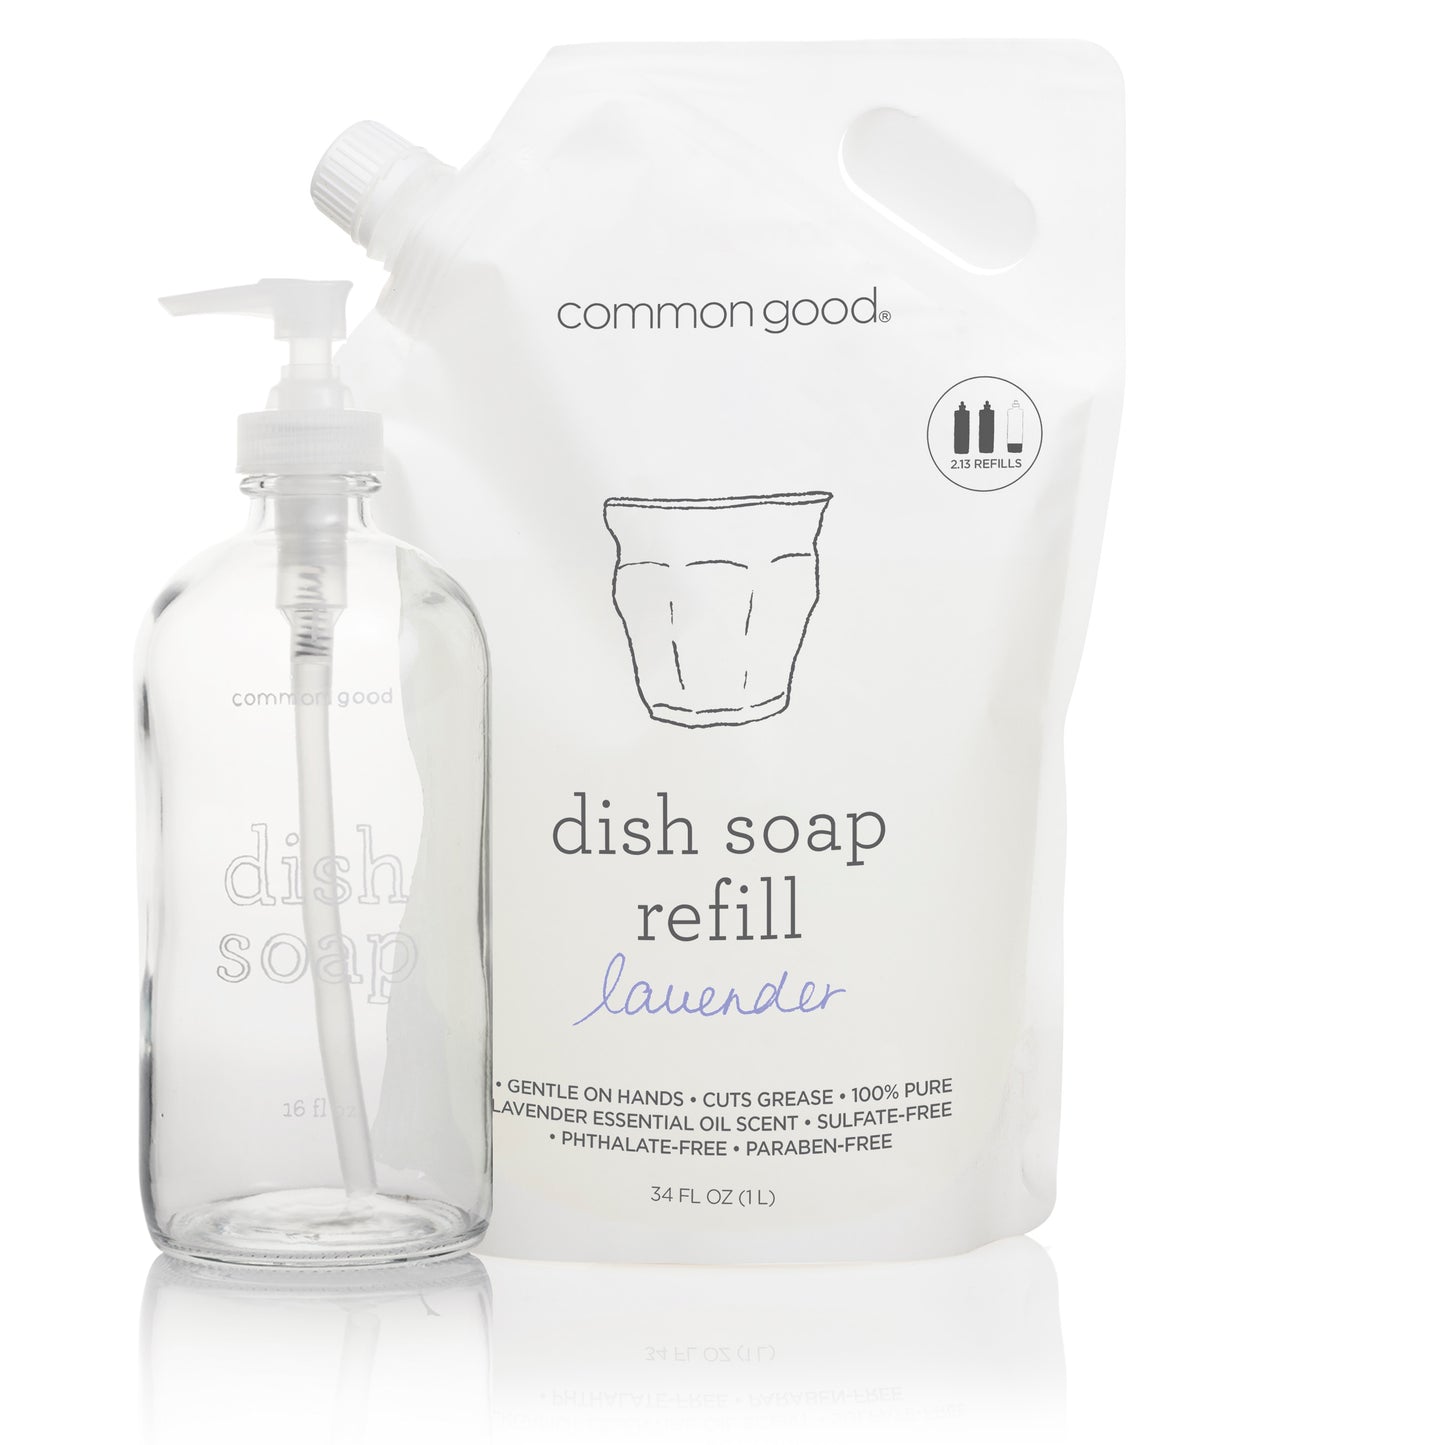 Dish Soap Refill Pouch and Glass Bottle Set